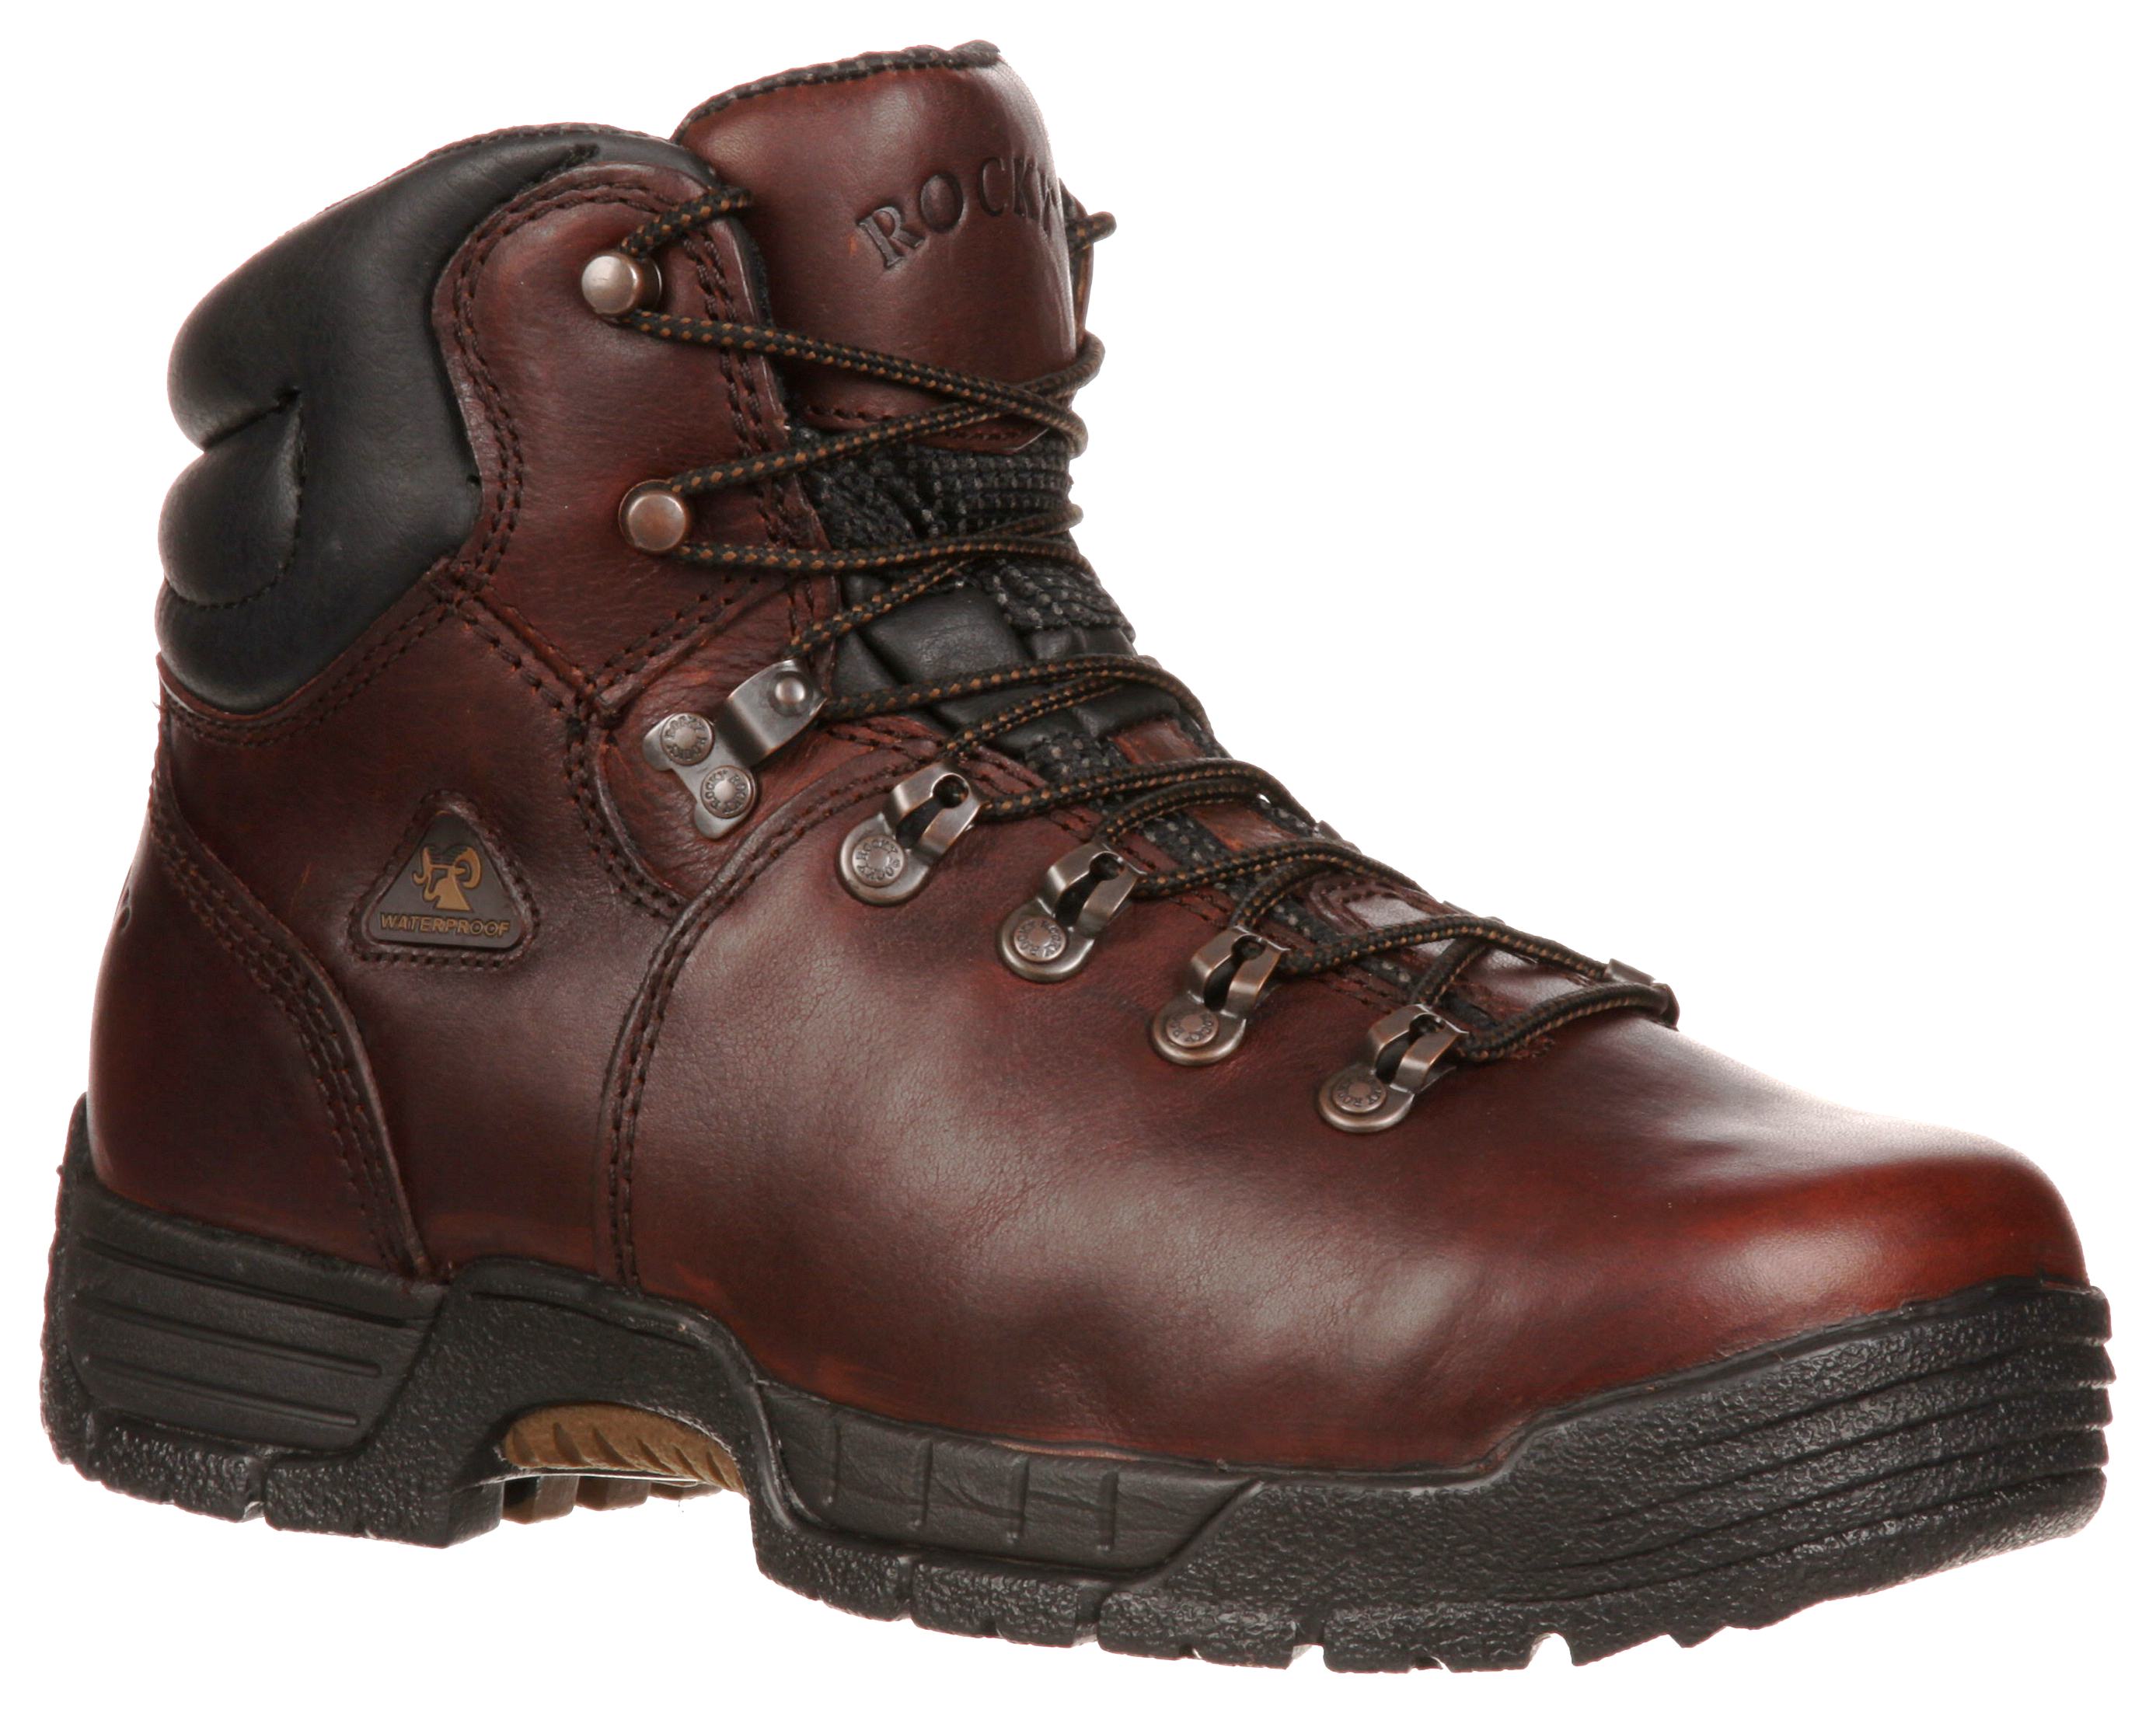 ROCKY MobiLite Waterproof Work Boots for Men - Brown - 13 M